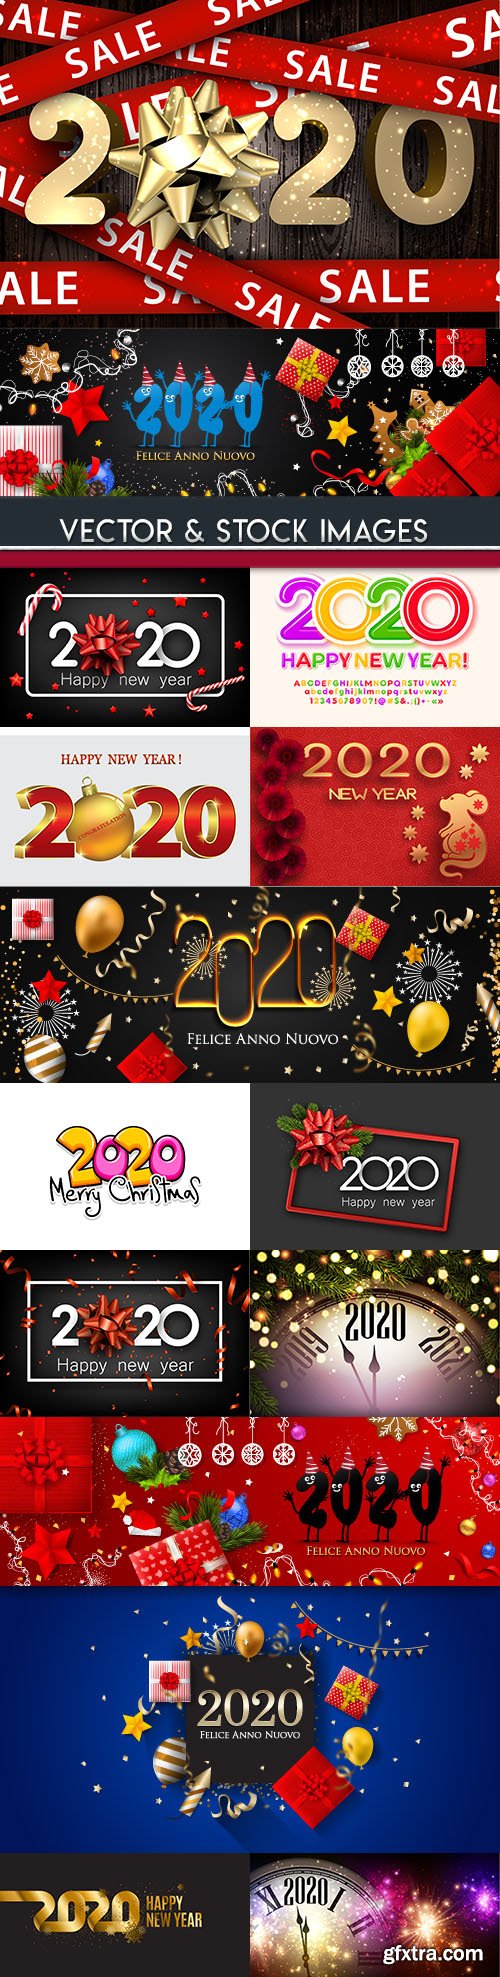 New Year and Christmas decorative 2020 illustration 7